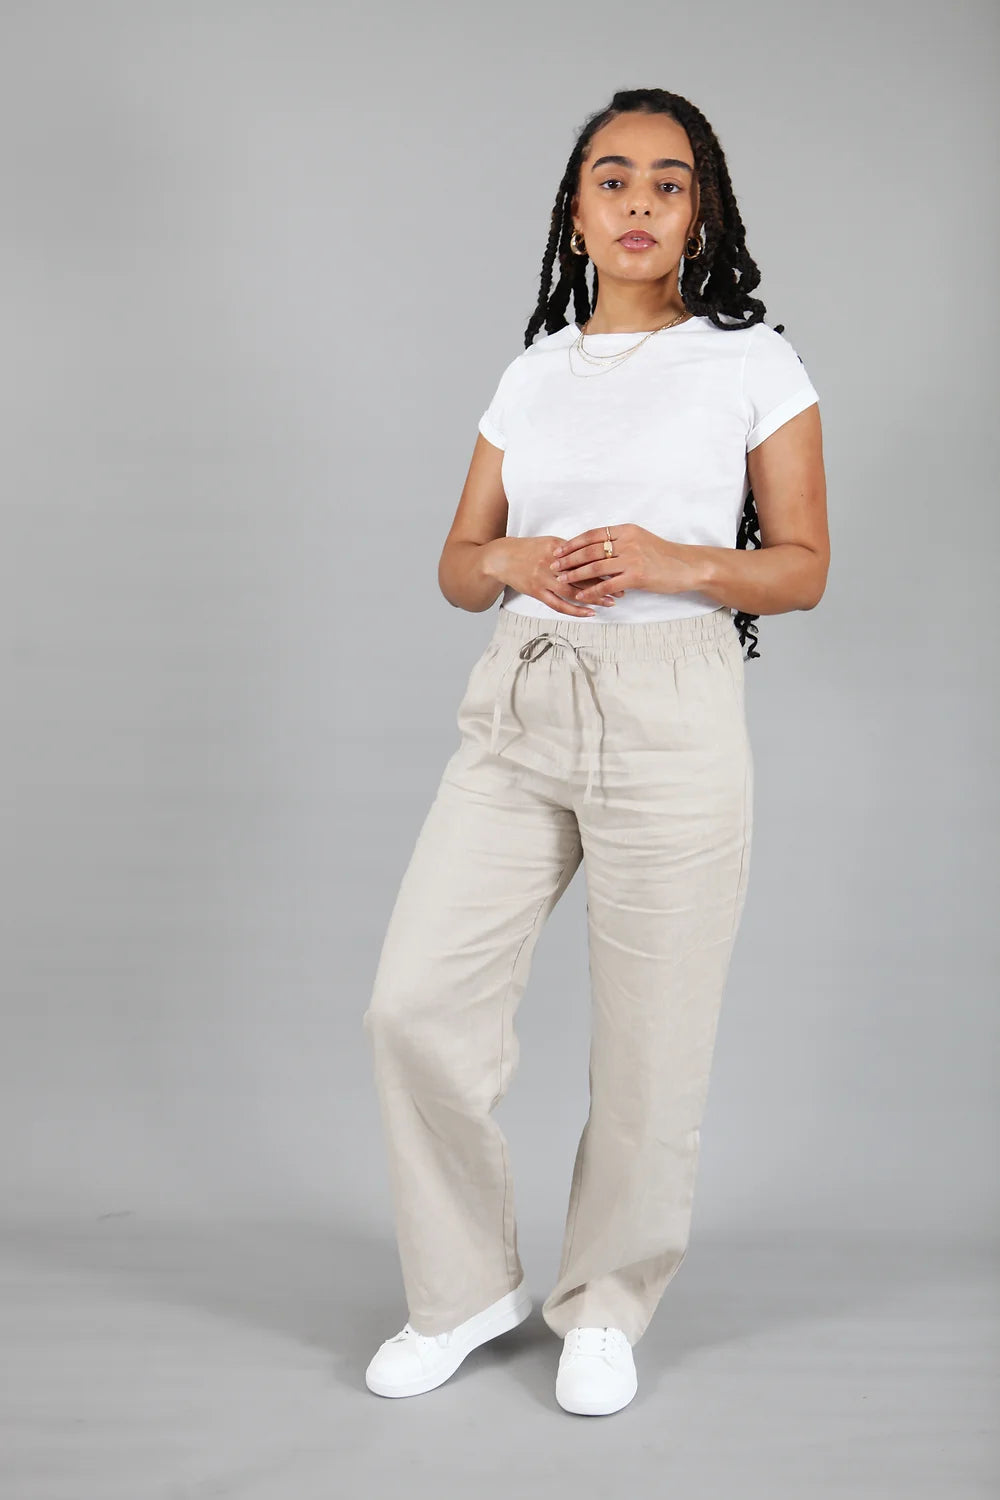 Dear Prudence Dear Prudence - Millie 100% Linen Trousers - Natural